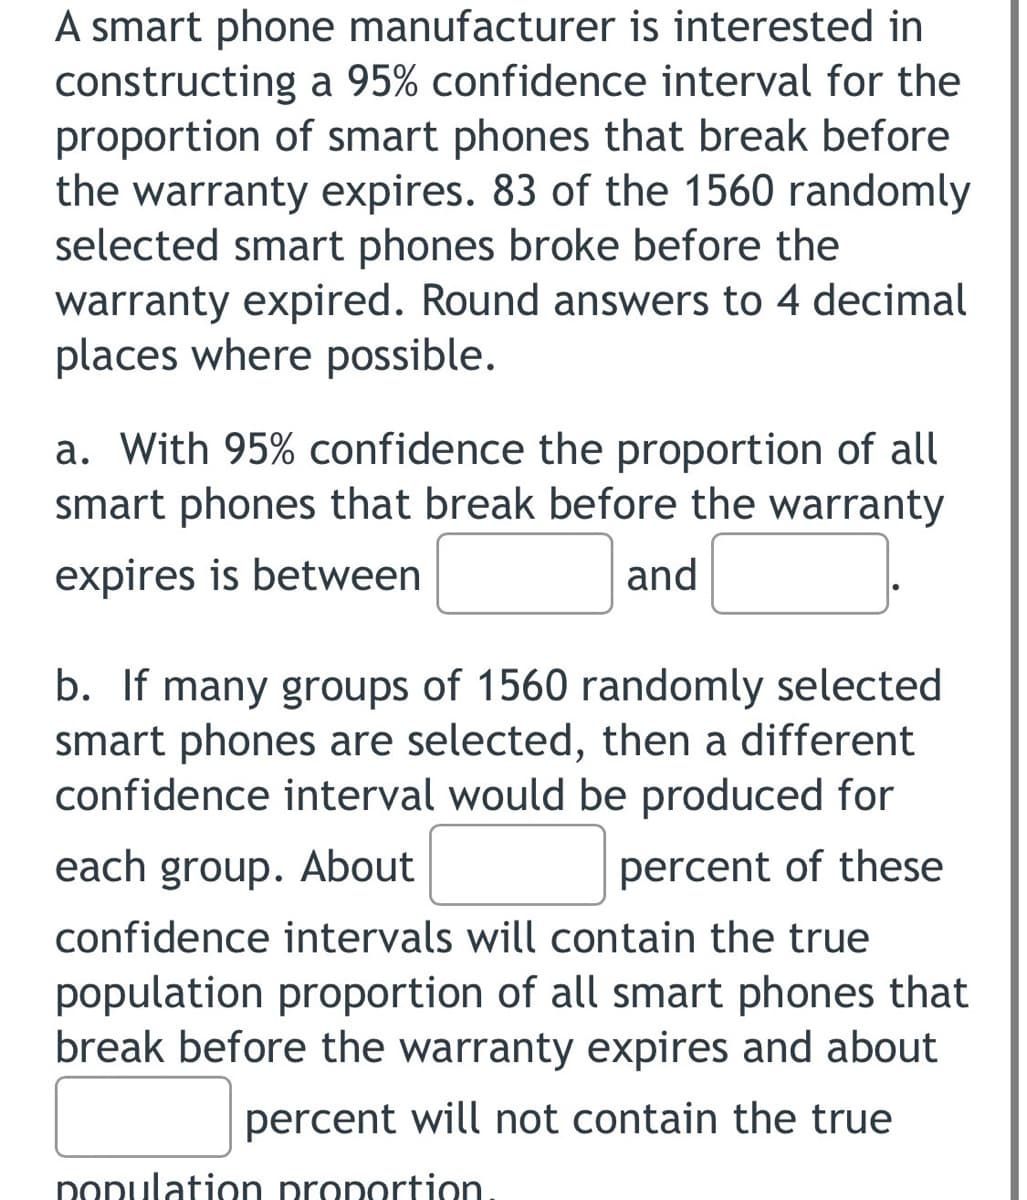 A smart phone manufacturer is interested in
constructing a 95% confidence interval for the
proportion of smart phones that break before
the warranty expires. 83 of the 1560 randomly
selected smart phones broke before the
warranty expired. Round answers to 4 decimal
places where possible.
a. With 95% confidence the proportion of all
smart phones that break before the warranty
expires is between
and
b. If many groups of 1560 randomly selected
smart phones are selected, then a different
confidence interval would be produced for
each group. About
percent of these
confidence intervals will contain the true
population proportion of all smart phones that
break before the warranty expires and about
percent will not contain the true
nonulation pronortion
